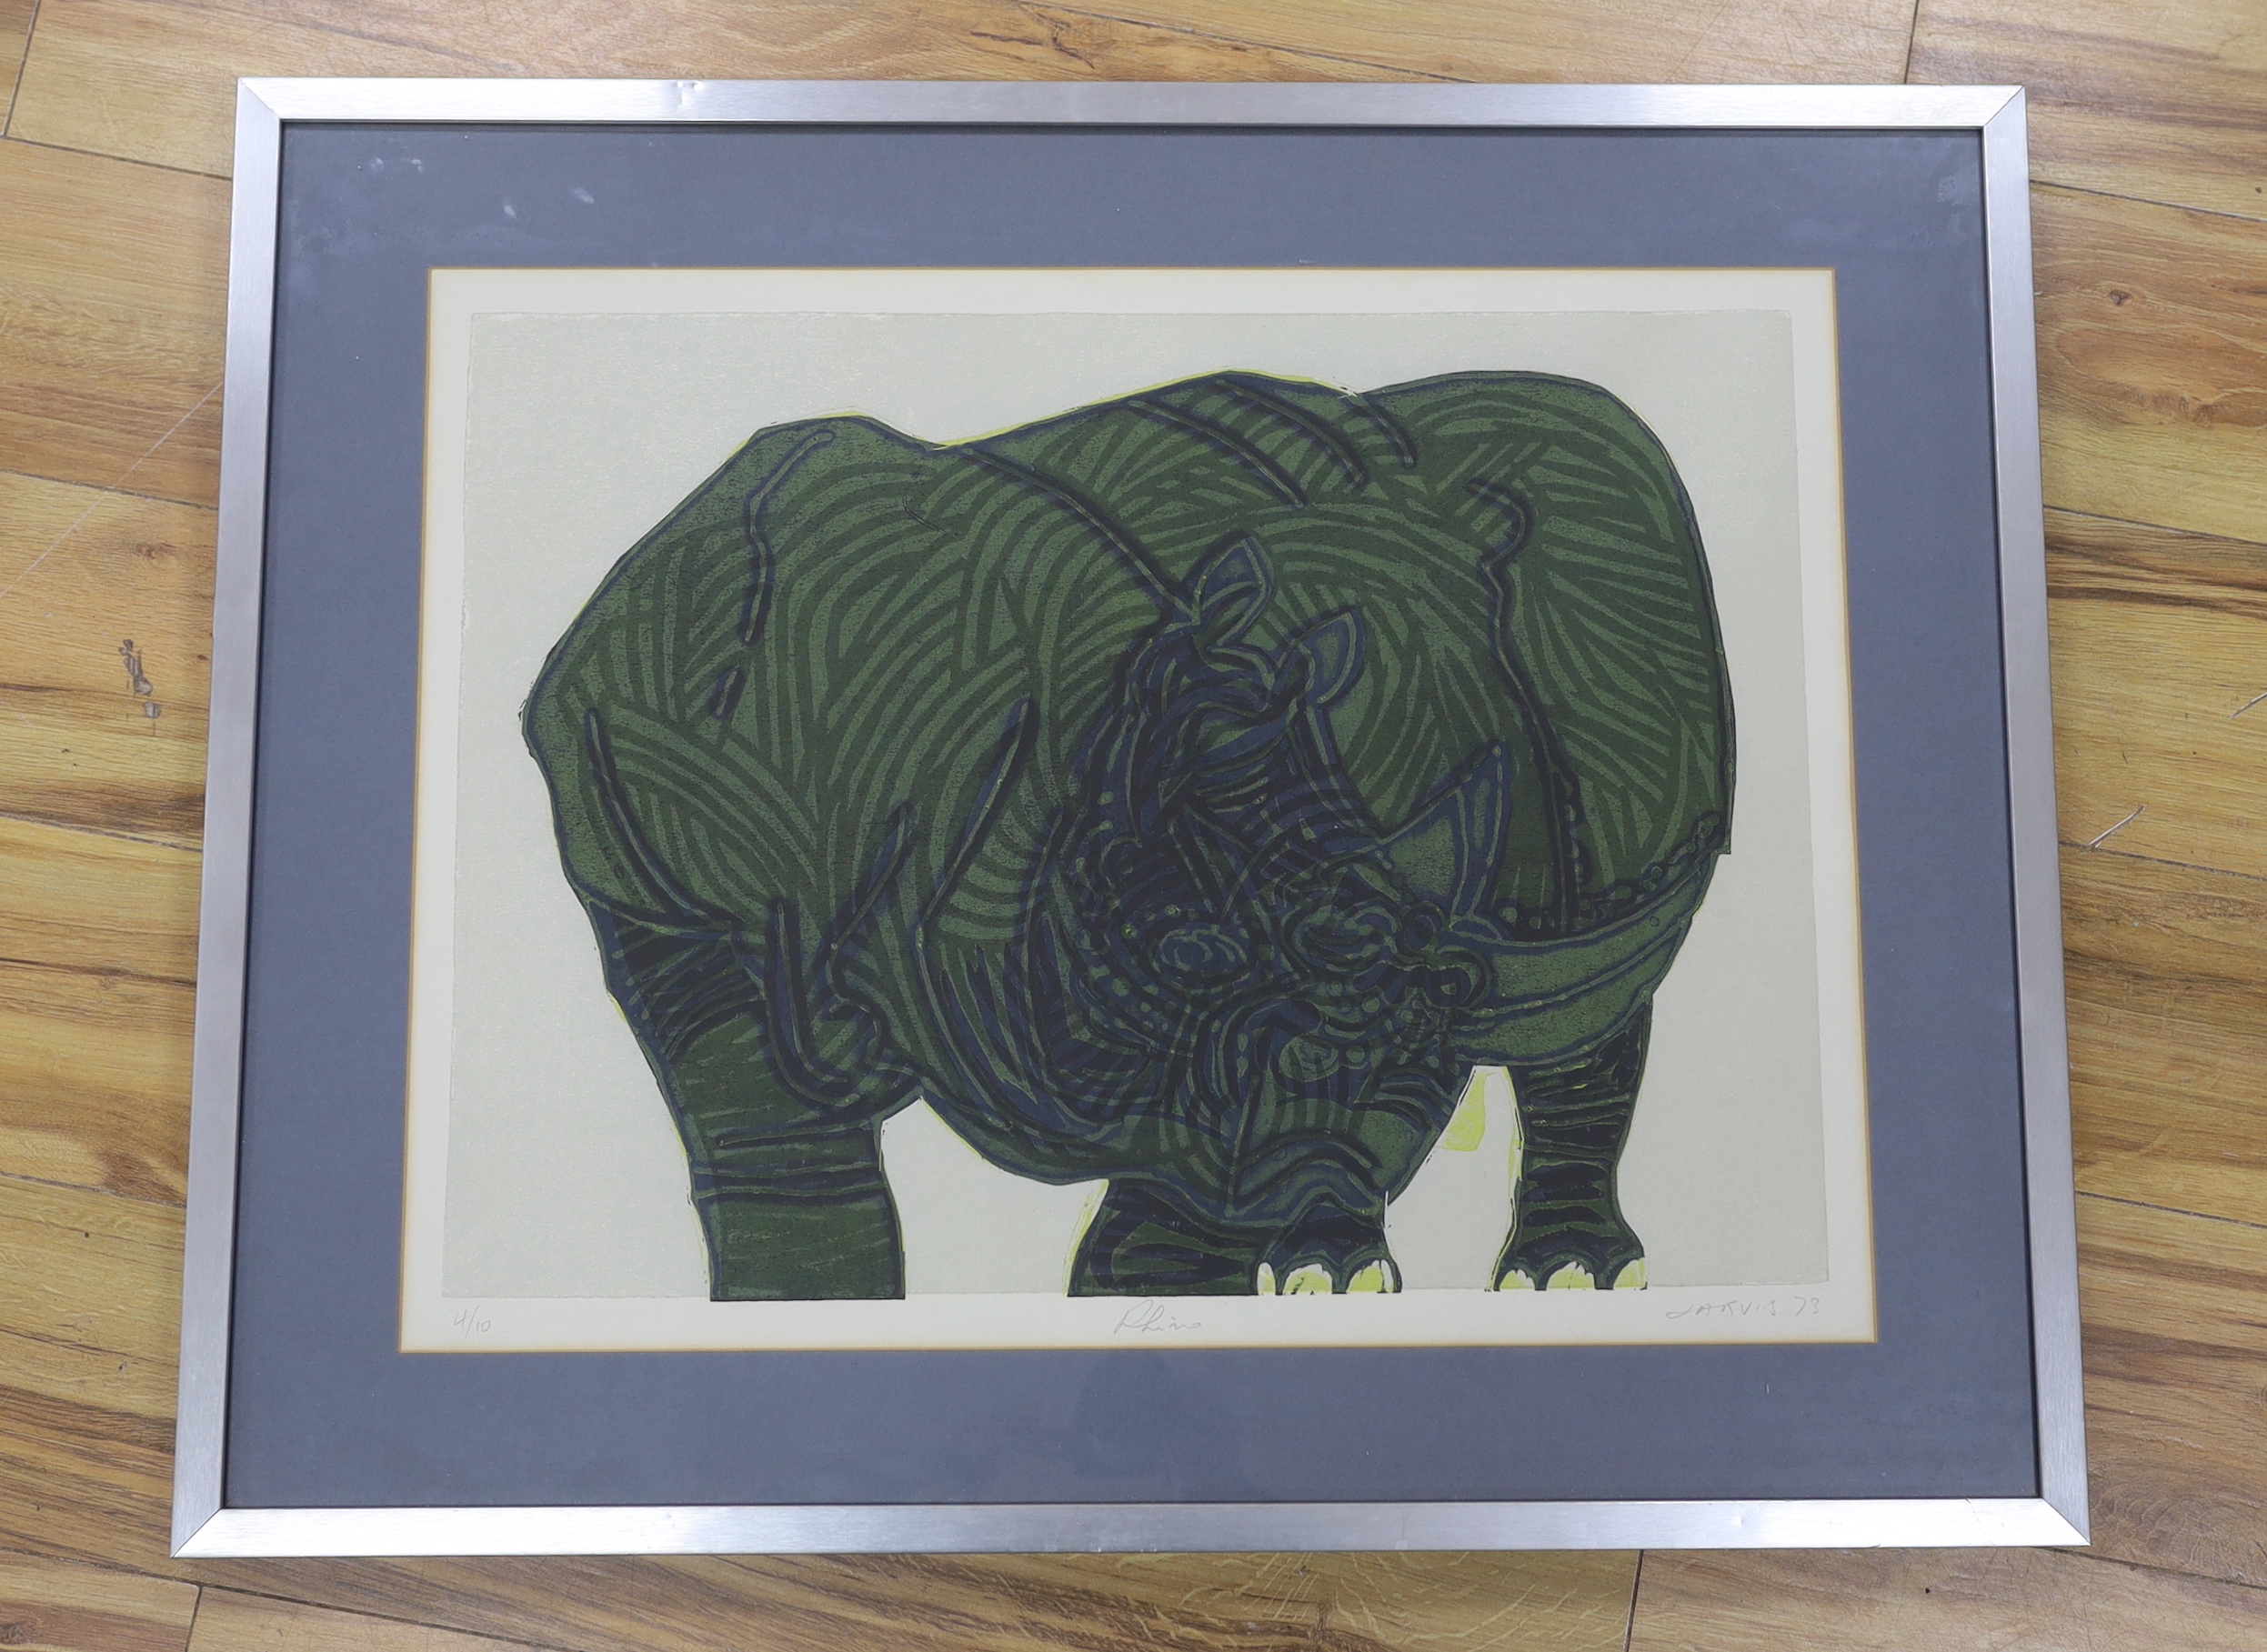 Roland Jarvis (1926-2016), colour etching, Rhino, signed and dated '73 in pencil, limited edition 4/10, 49 x 64cm